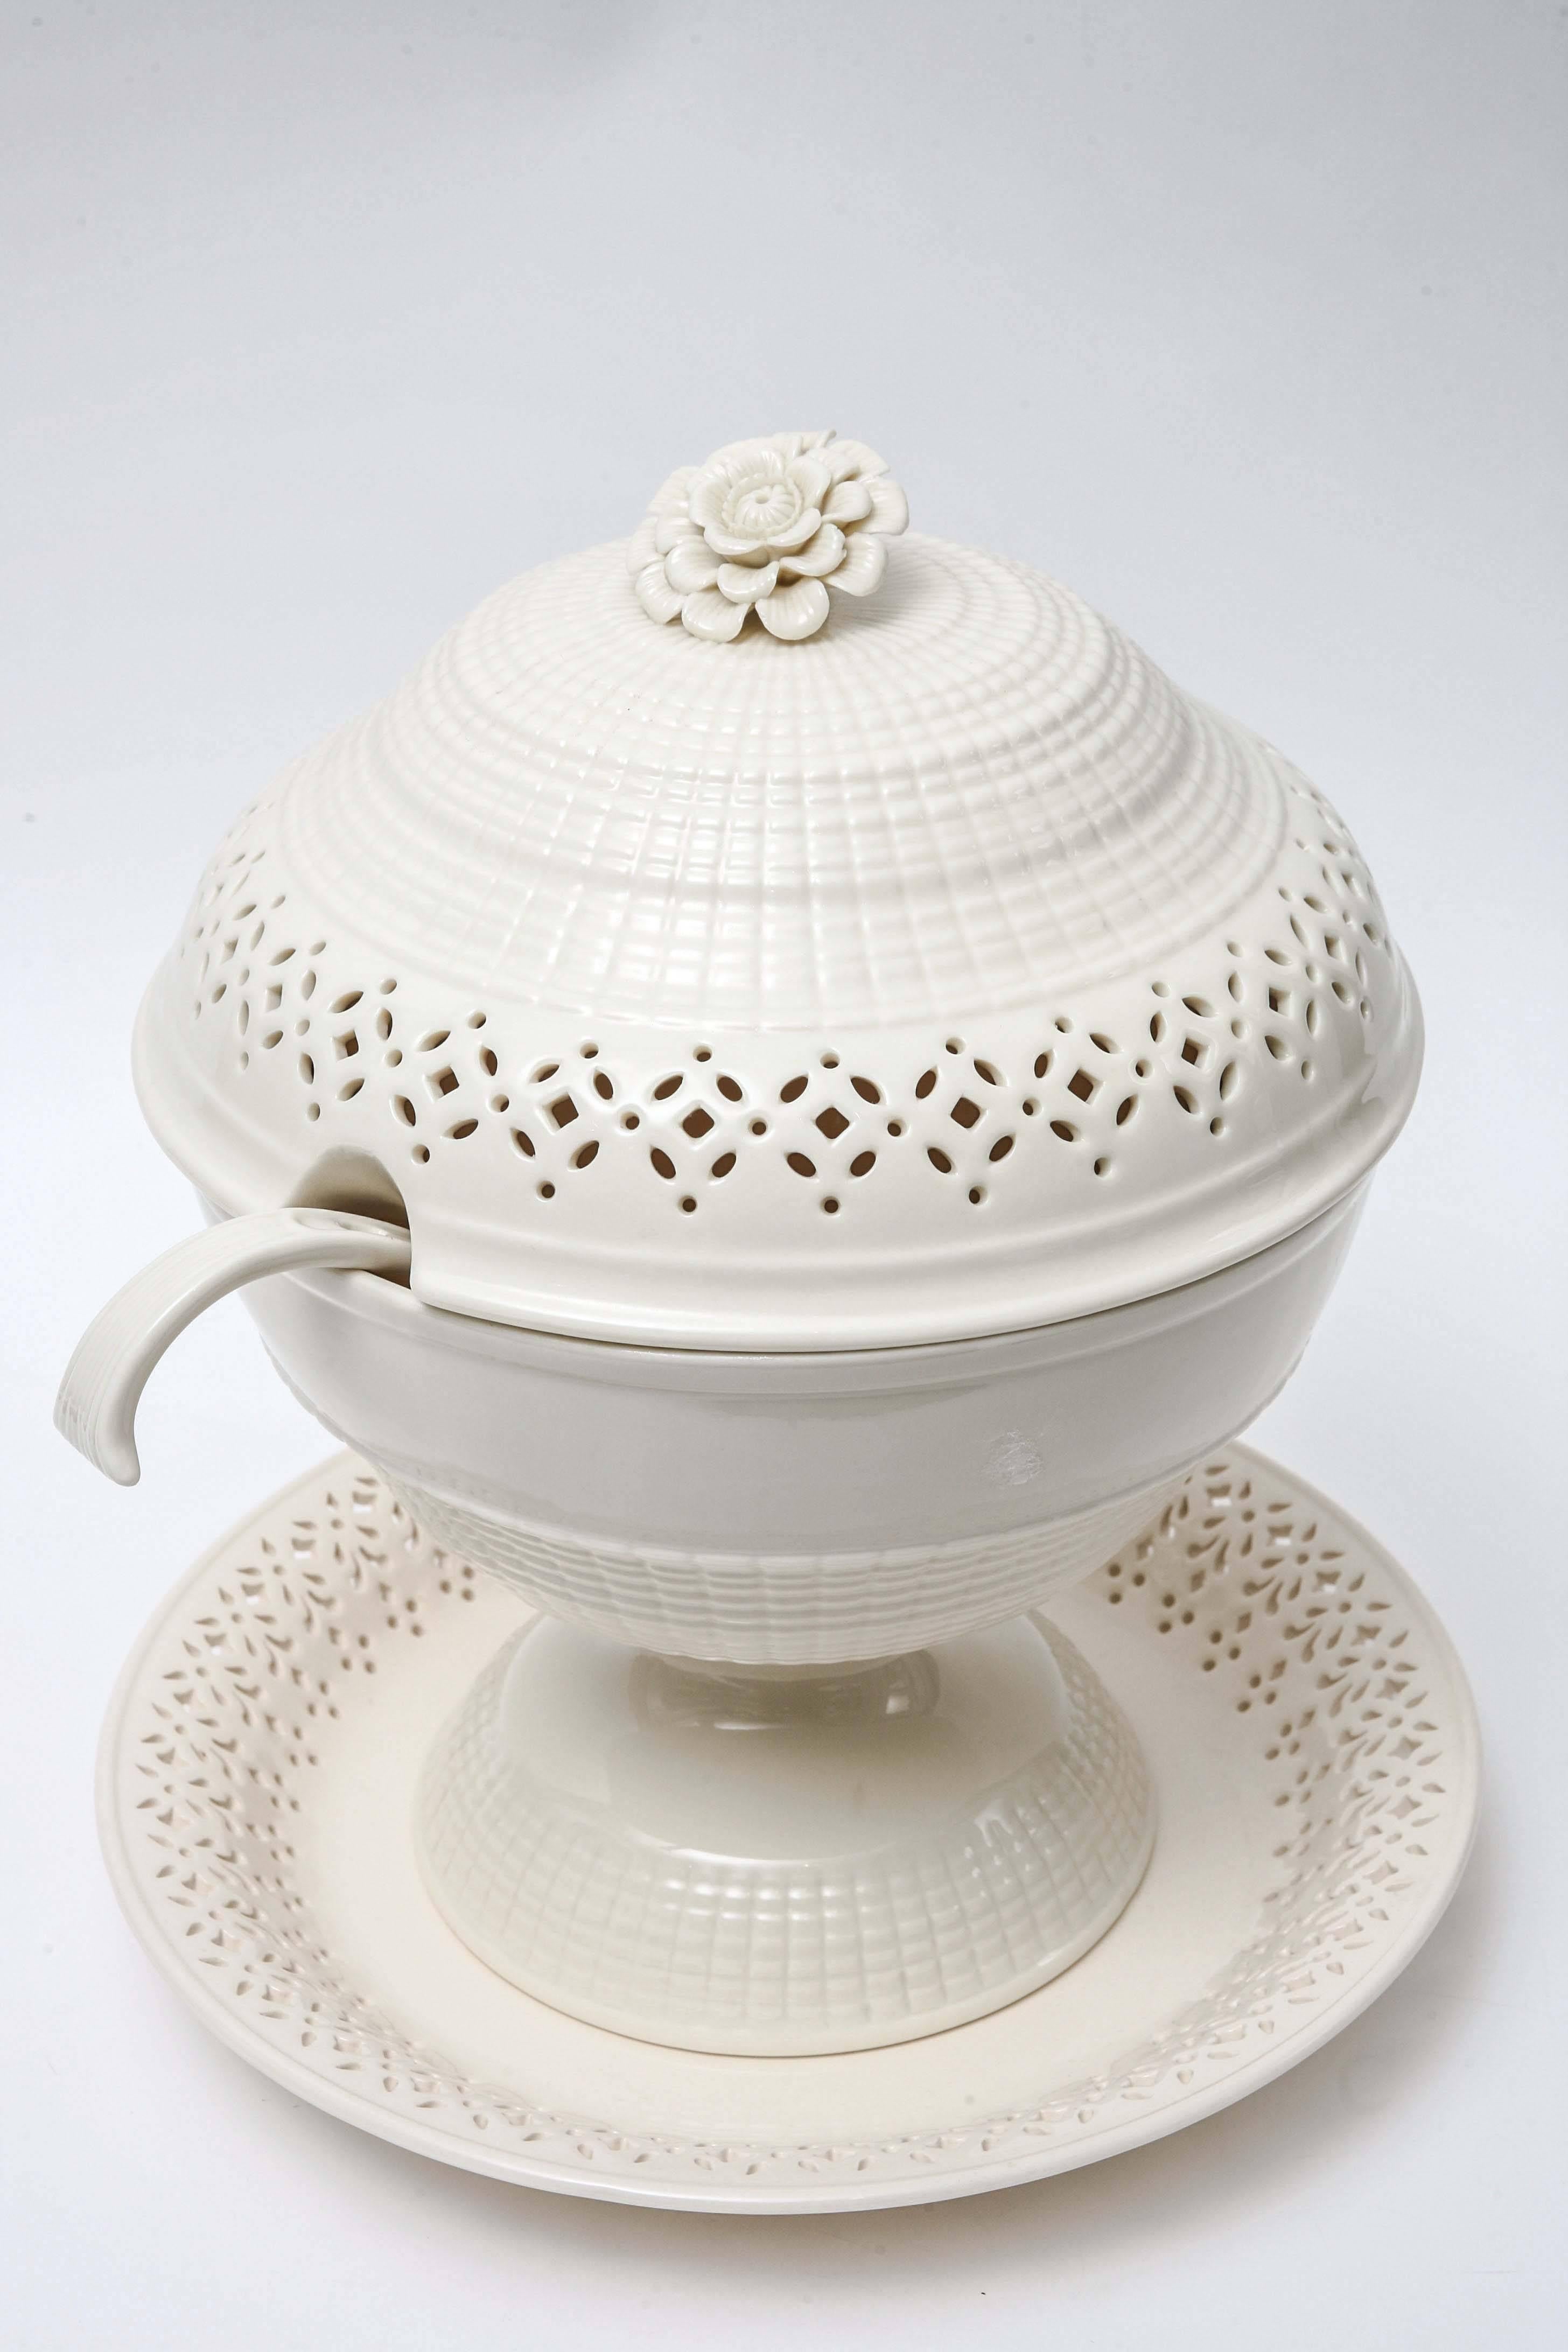 A large pedestal base cream ware tureen that features hand cut work, a lovely detailed floral topped finial. Complete with its ladle and undertray this stunning piece would work well as a centerpiece as well as anchor a display. A newer piece in